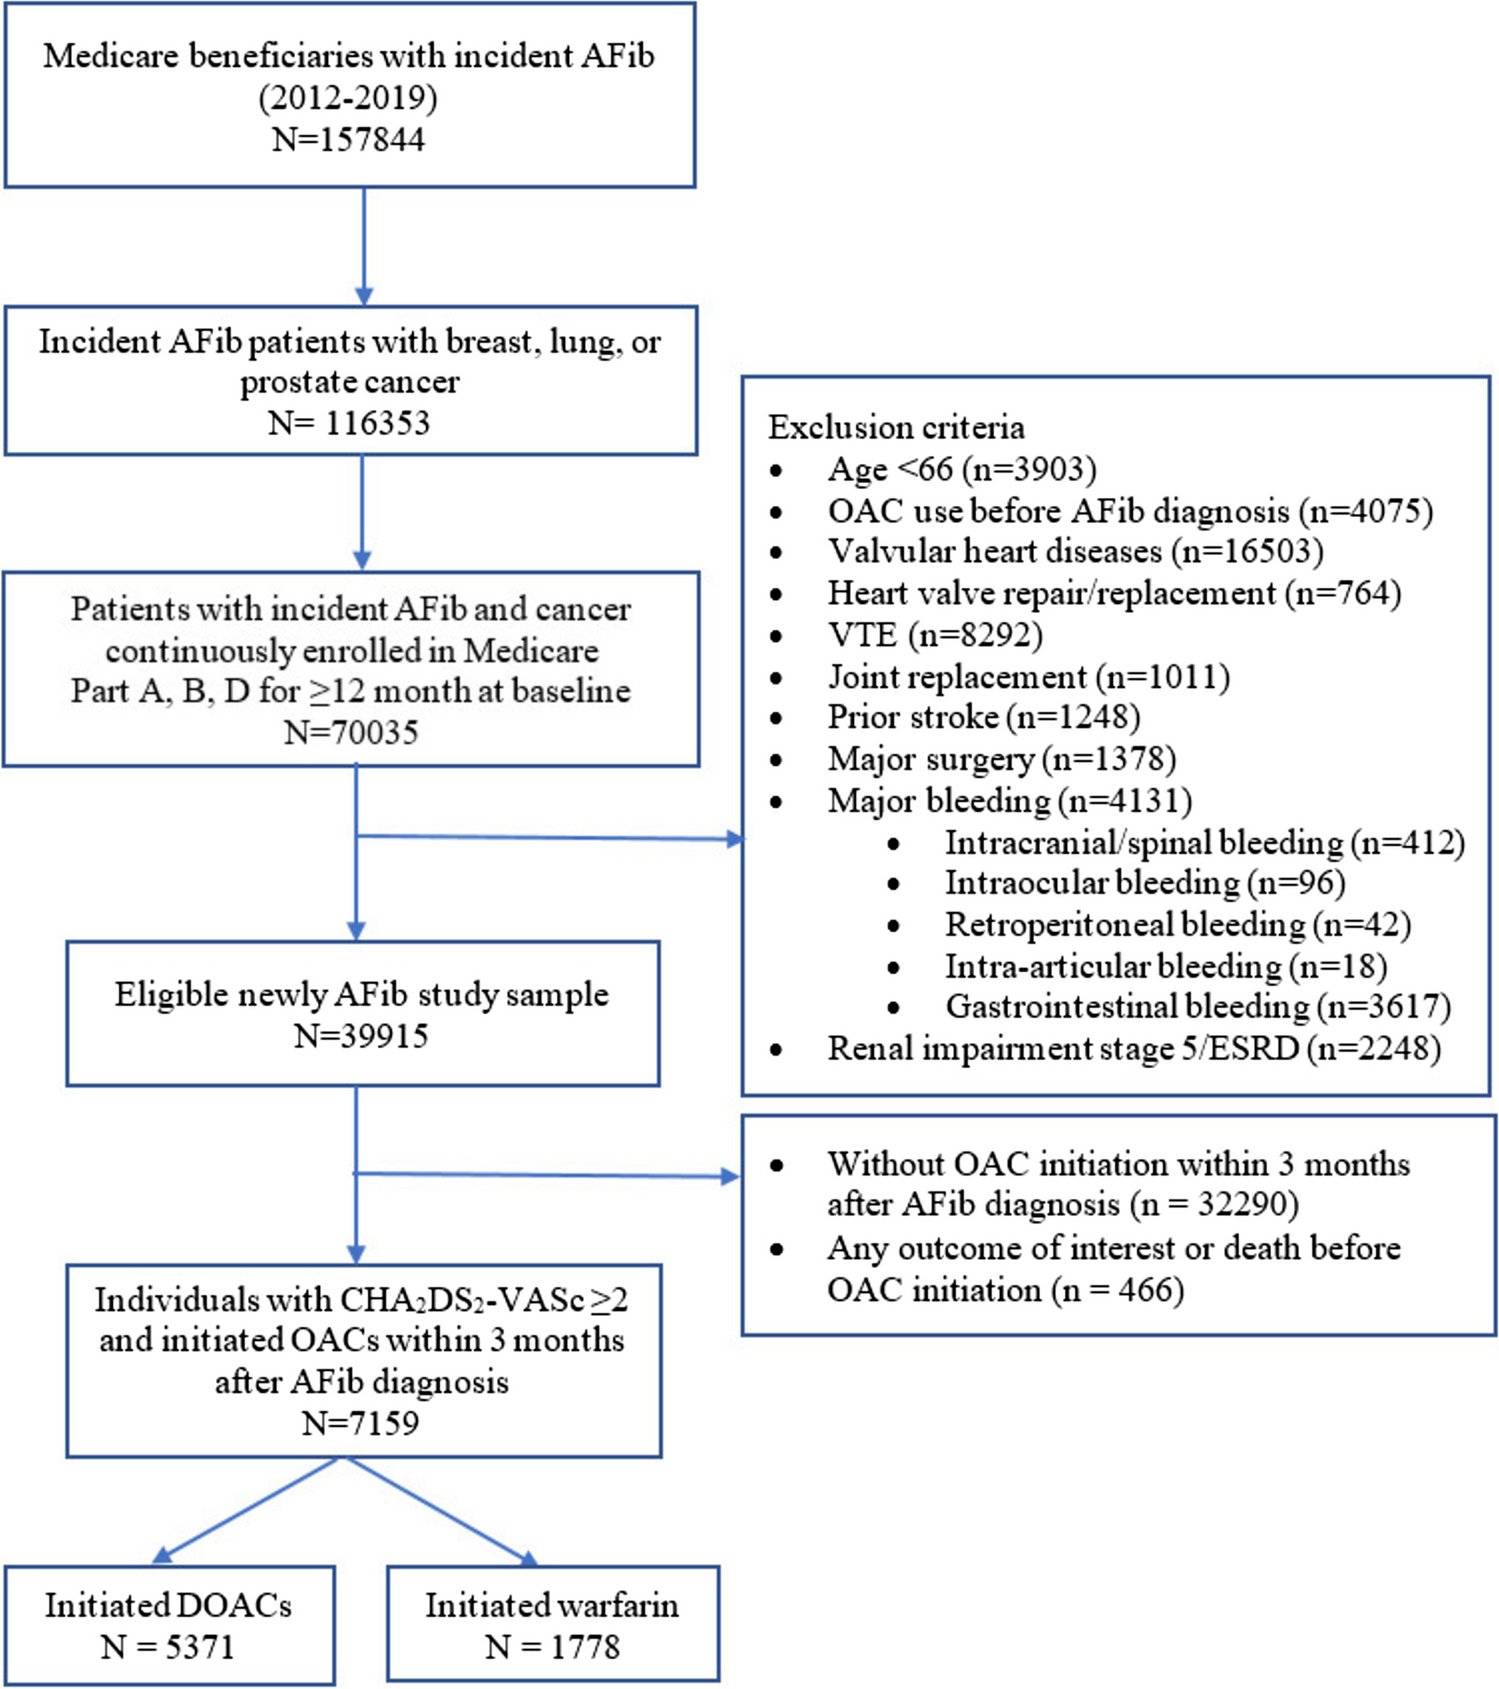 Effectiveness and Safety of Direct Oral Anticoagulants Versus Warfarin in Patients with Atrial Fibrillation and Cancer: A Target Trial Emulation from SEER-Medicare Database